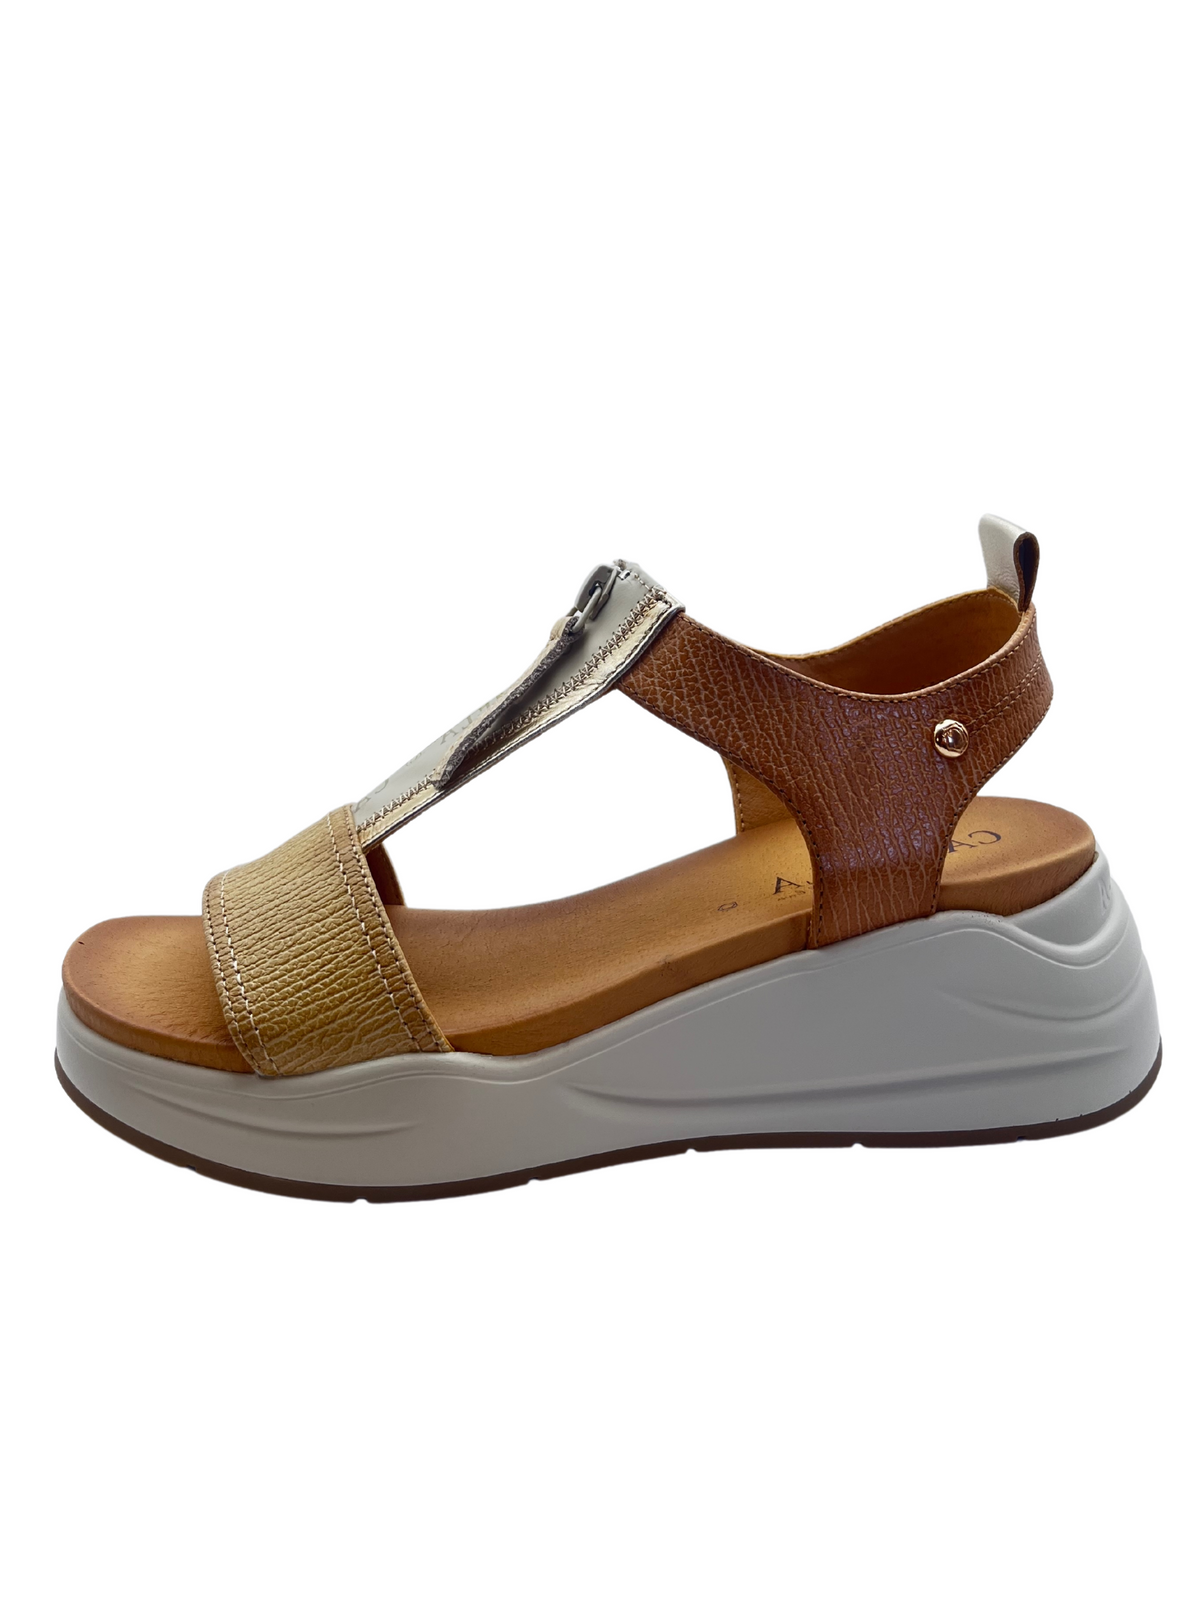 Carmela Combo Wedge Sandal With Zip Up Front